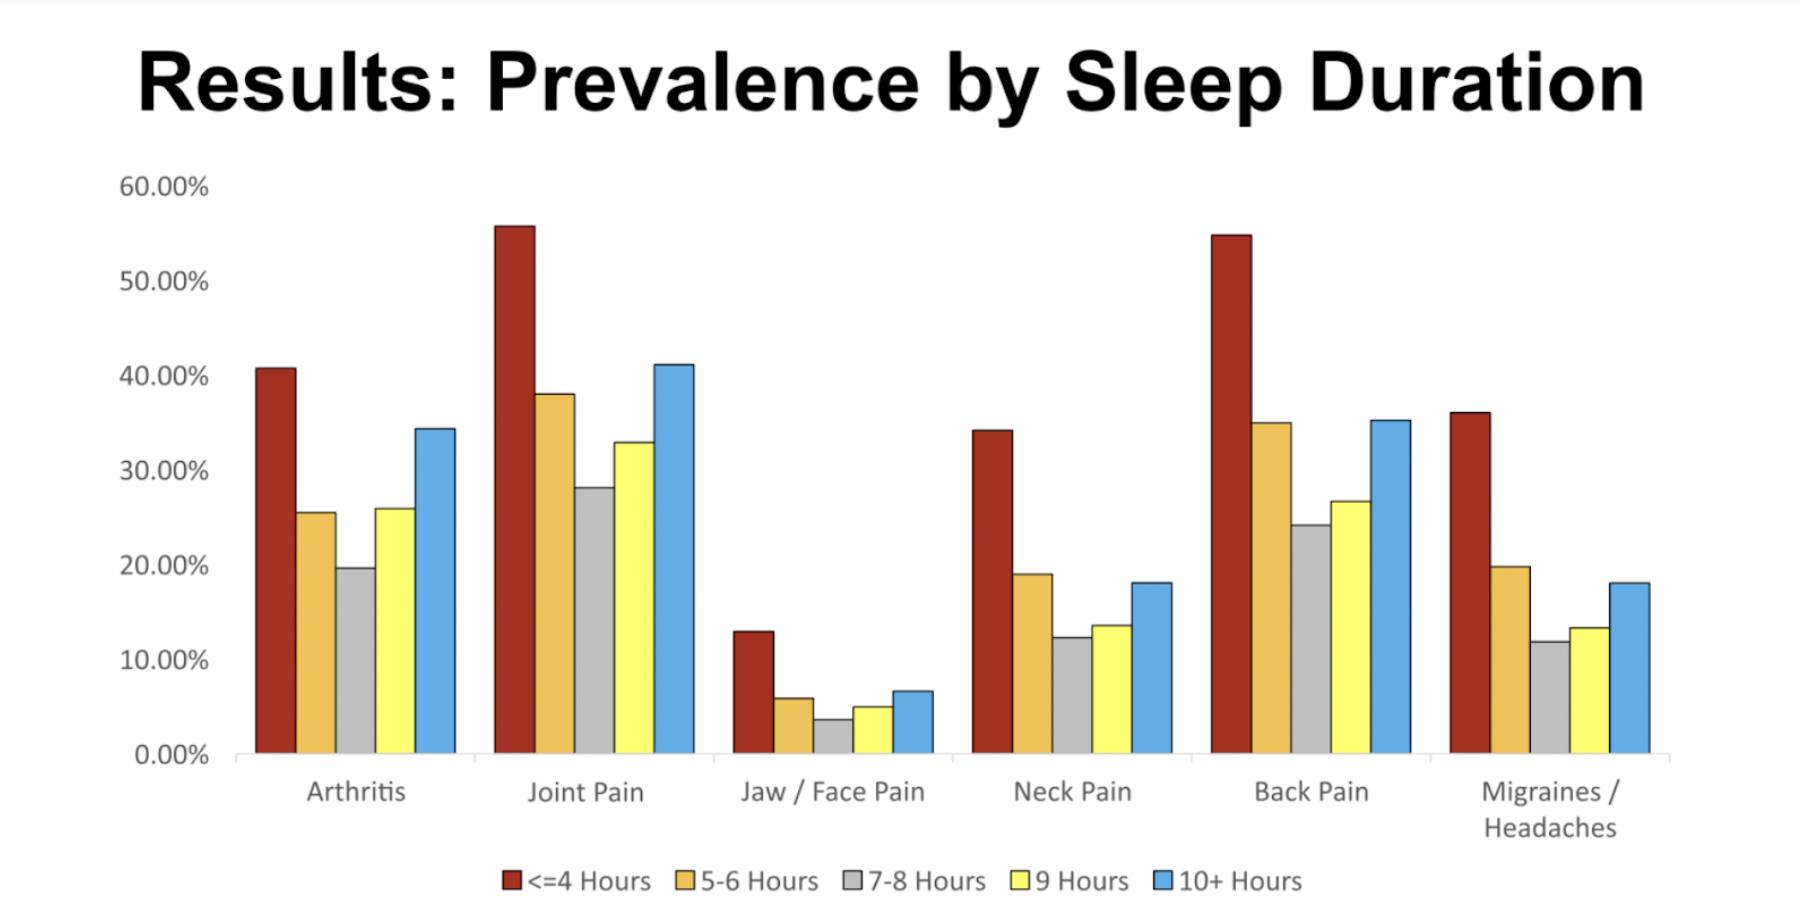 Results - Prevalence by Sleep Duration